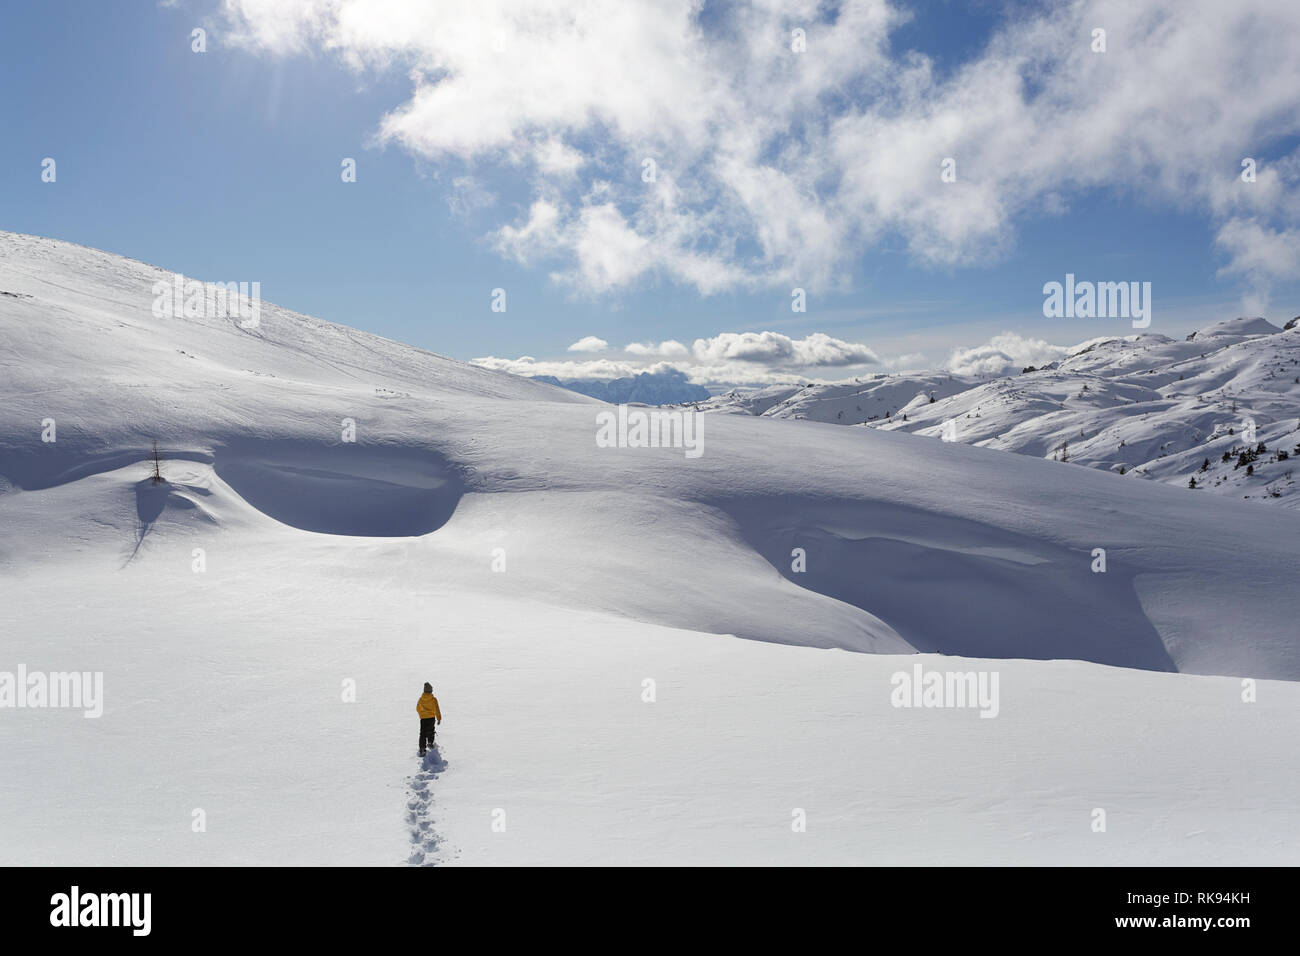 Young boy in yellow winter jacket walking in deep snow in snow covered winter mountain landscape, Dobratsch, Austria Stock Photo